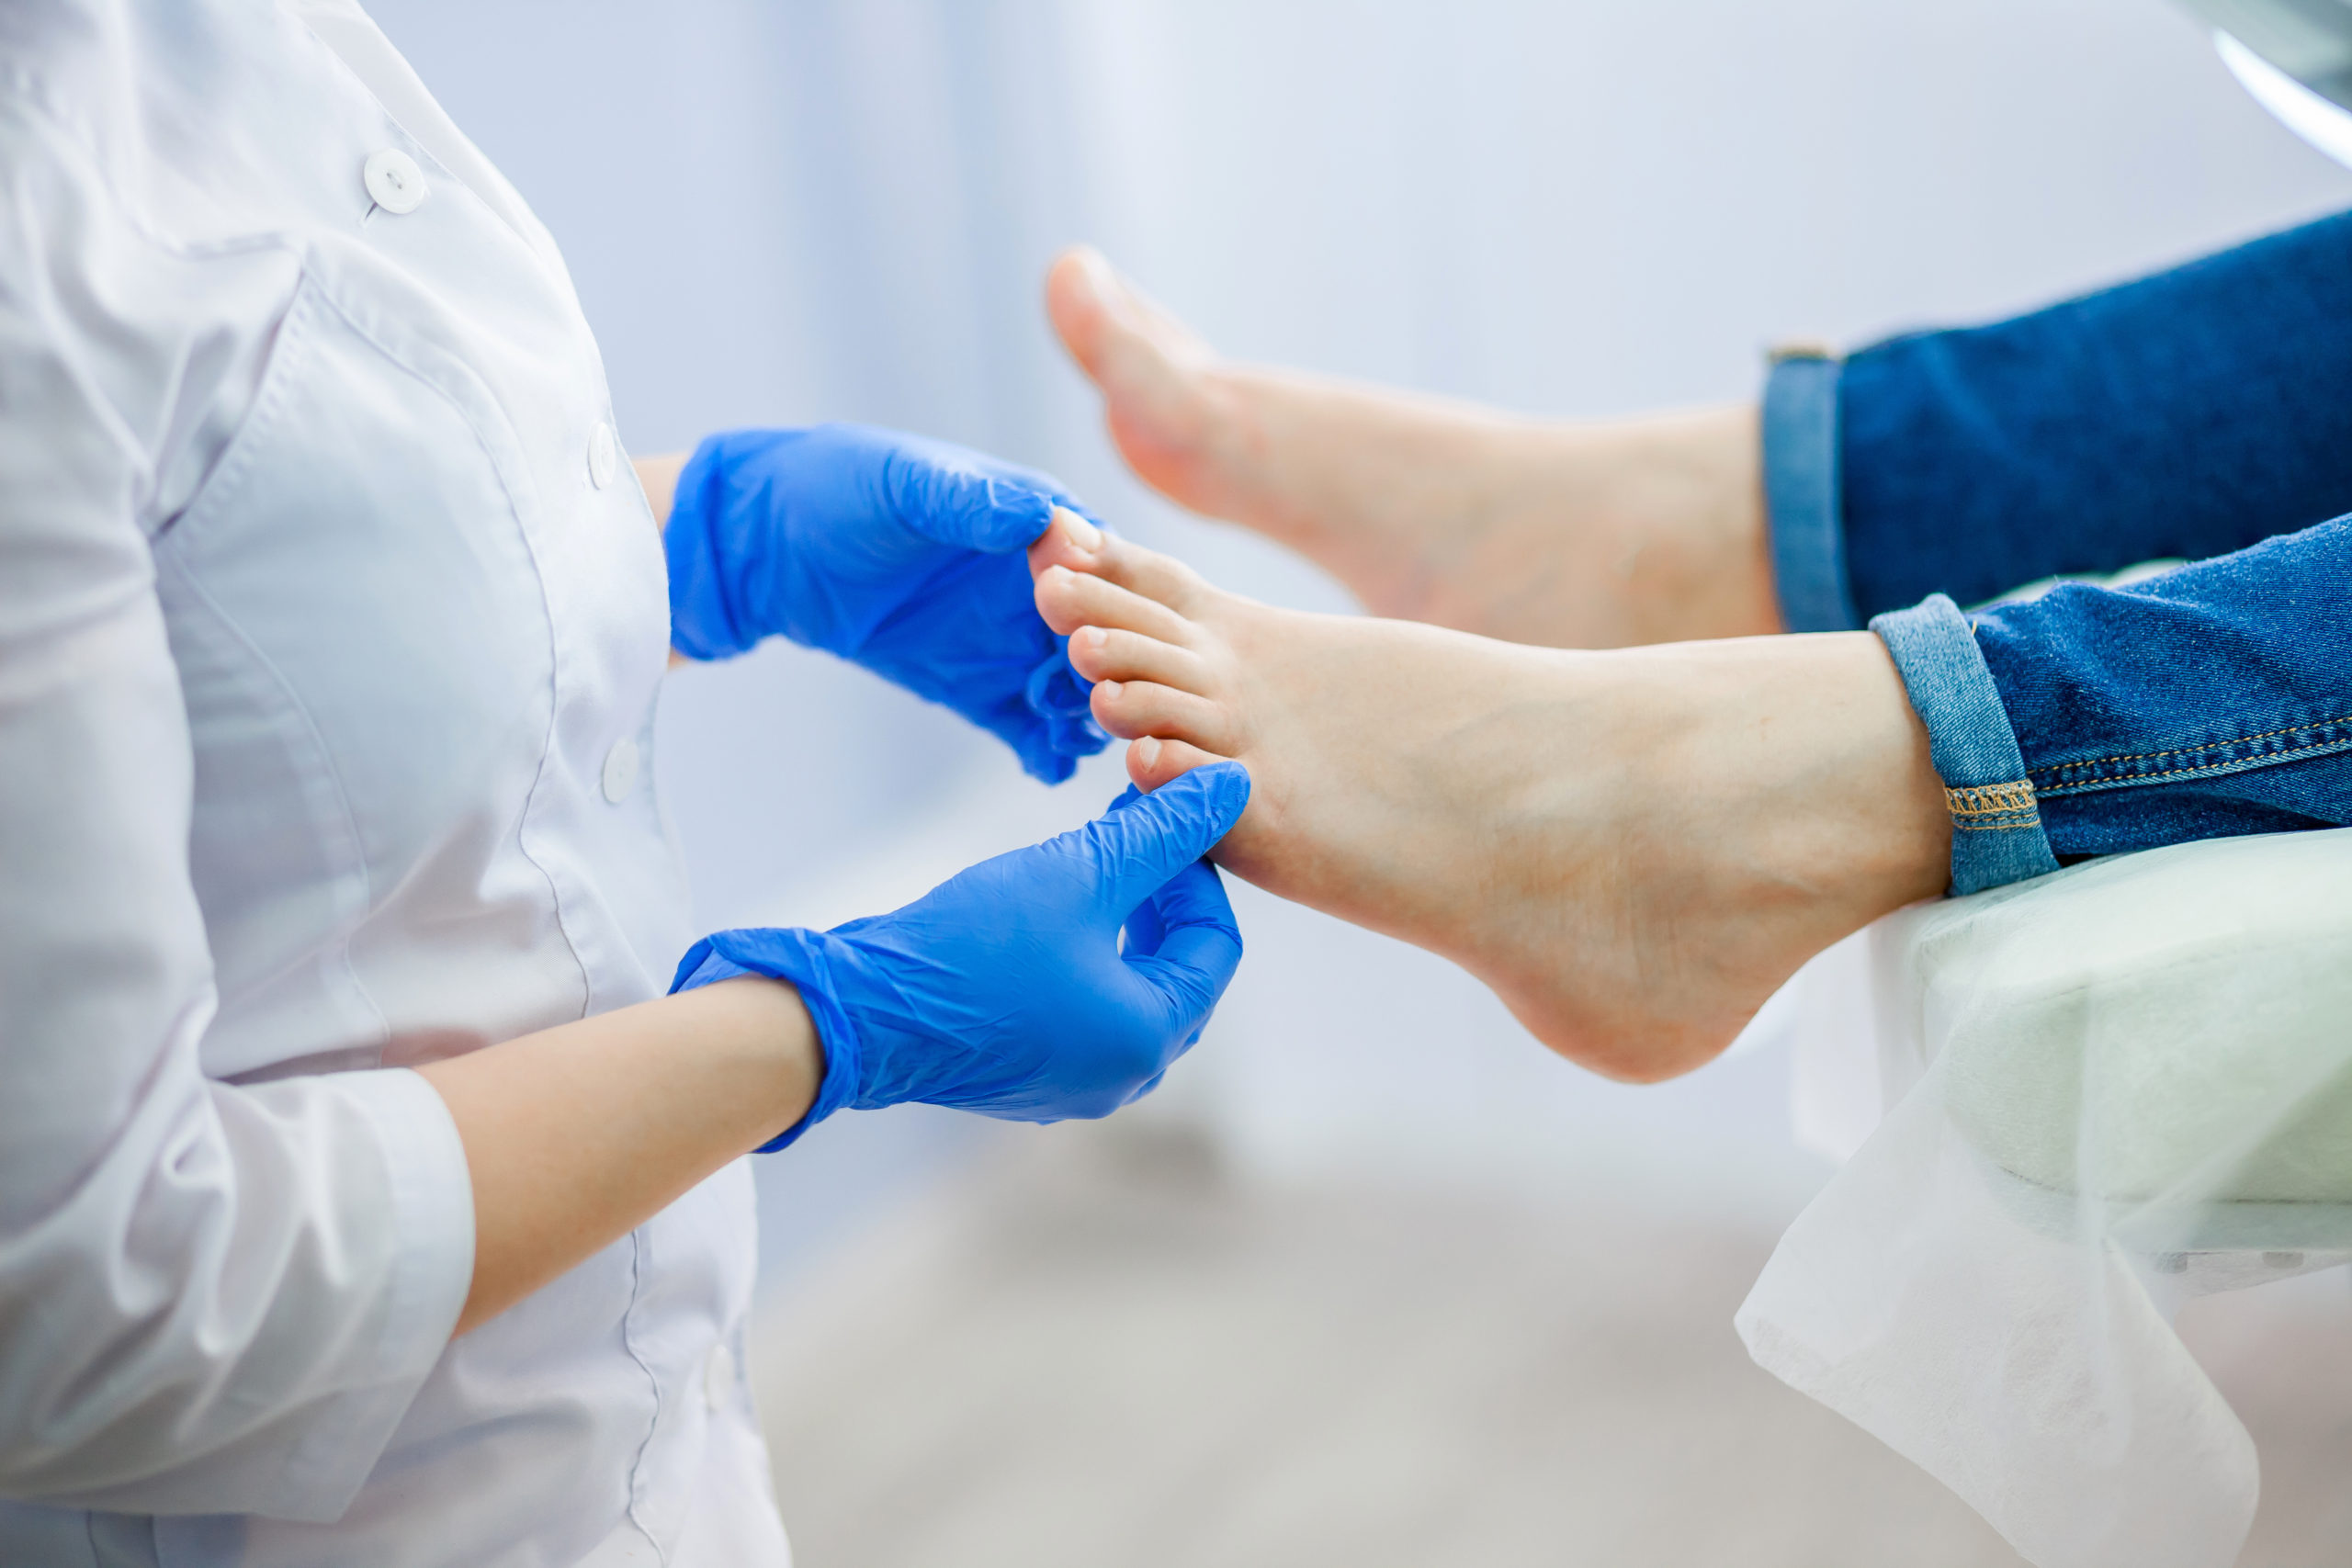 Treating Your Ankle Sprain